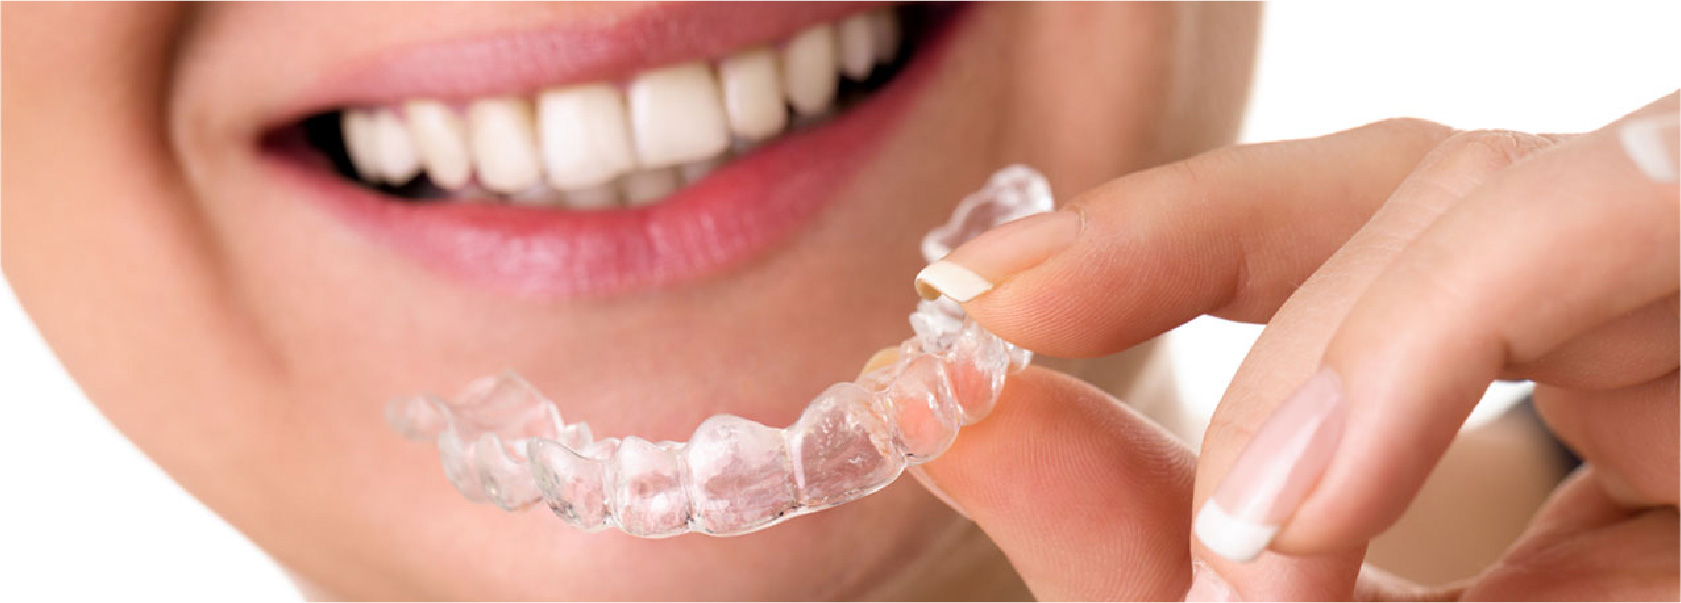 Invisalign tray being put in mouth